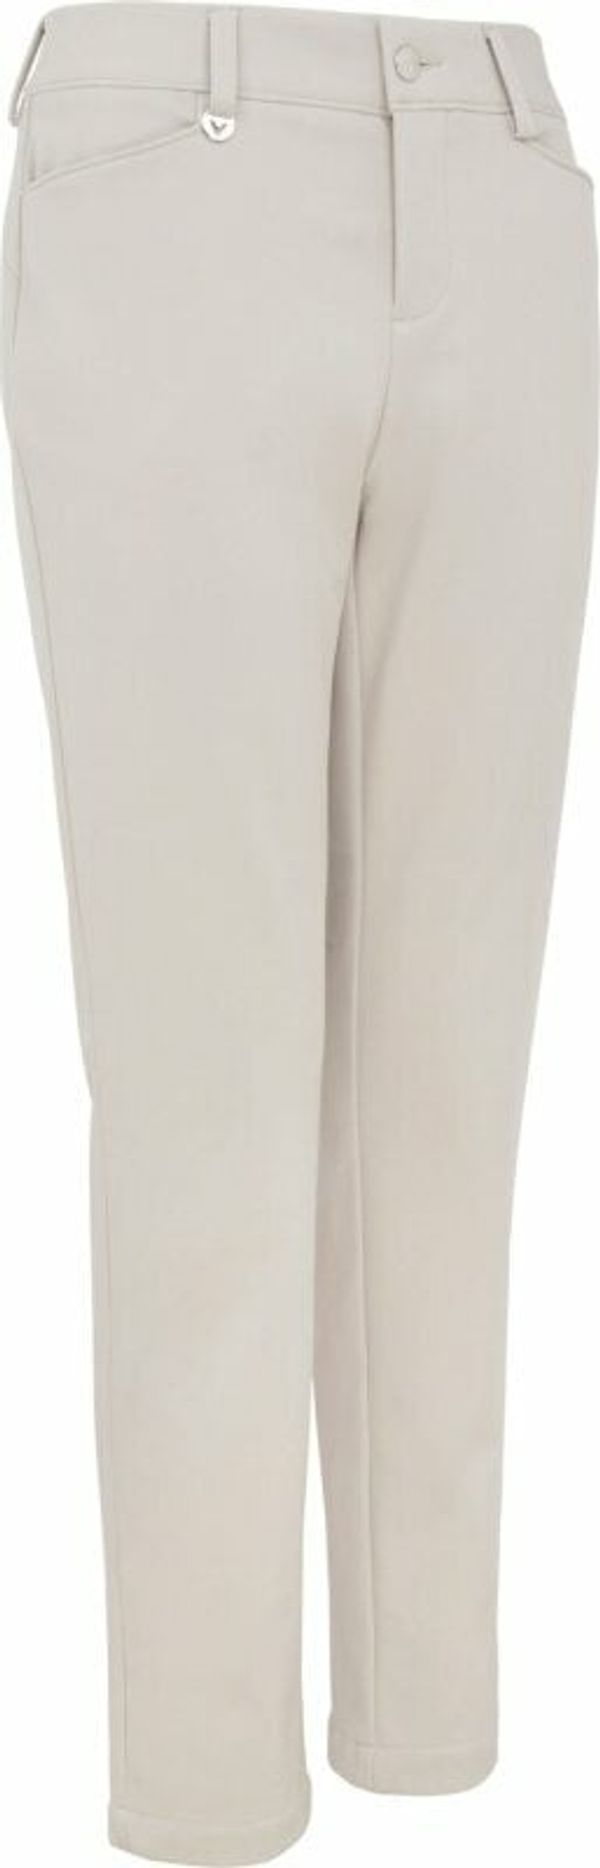 Callaway Callaway Thermal Womens Trousers Chateau Gray 6/32